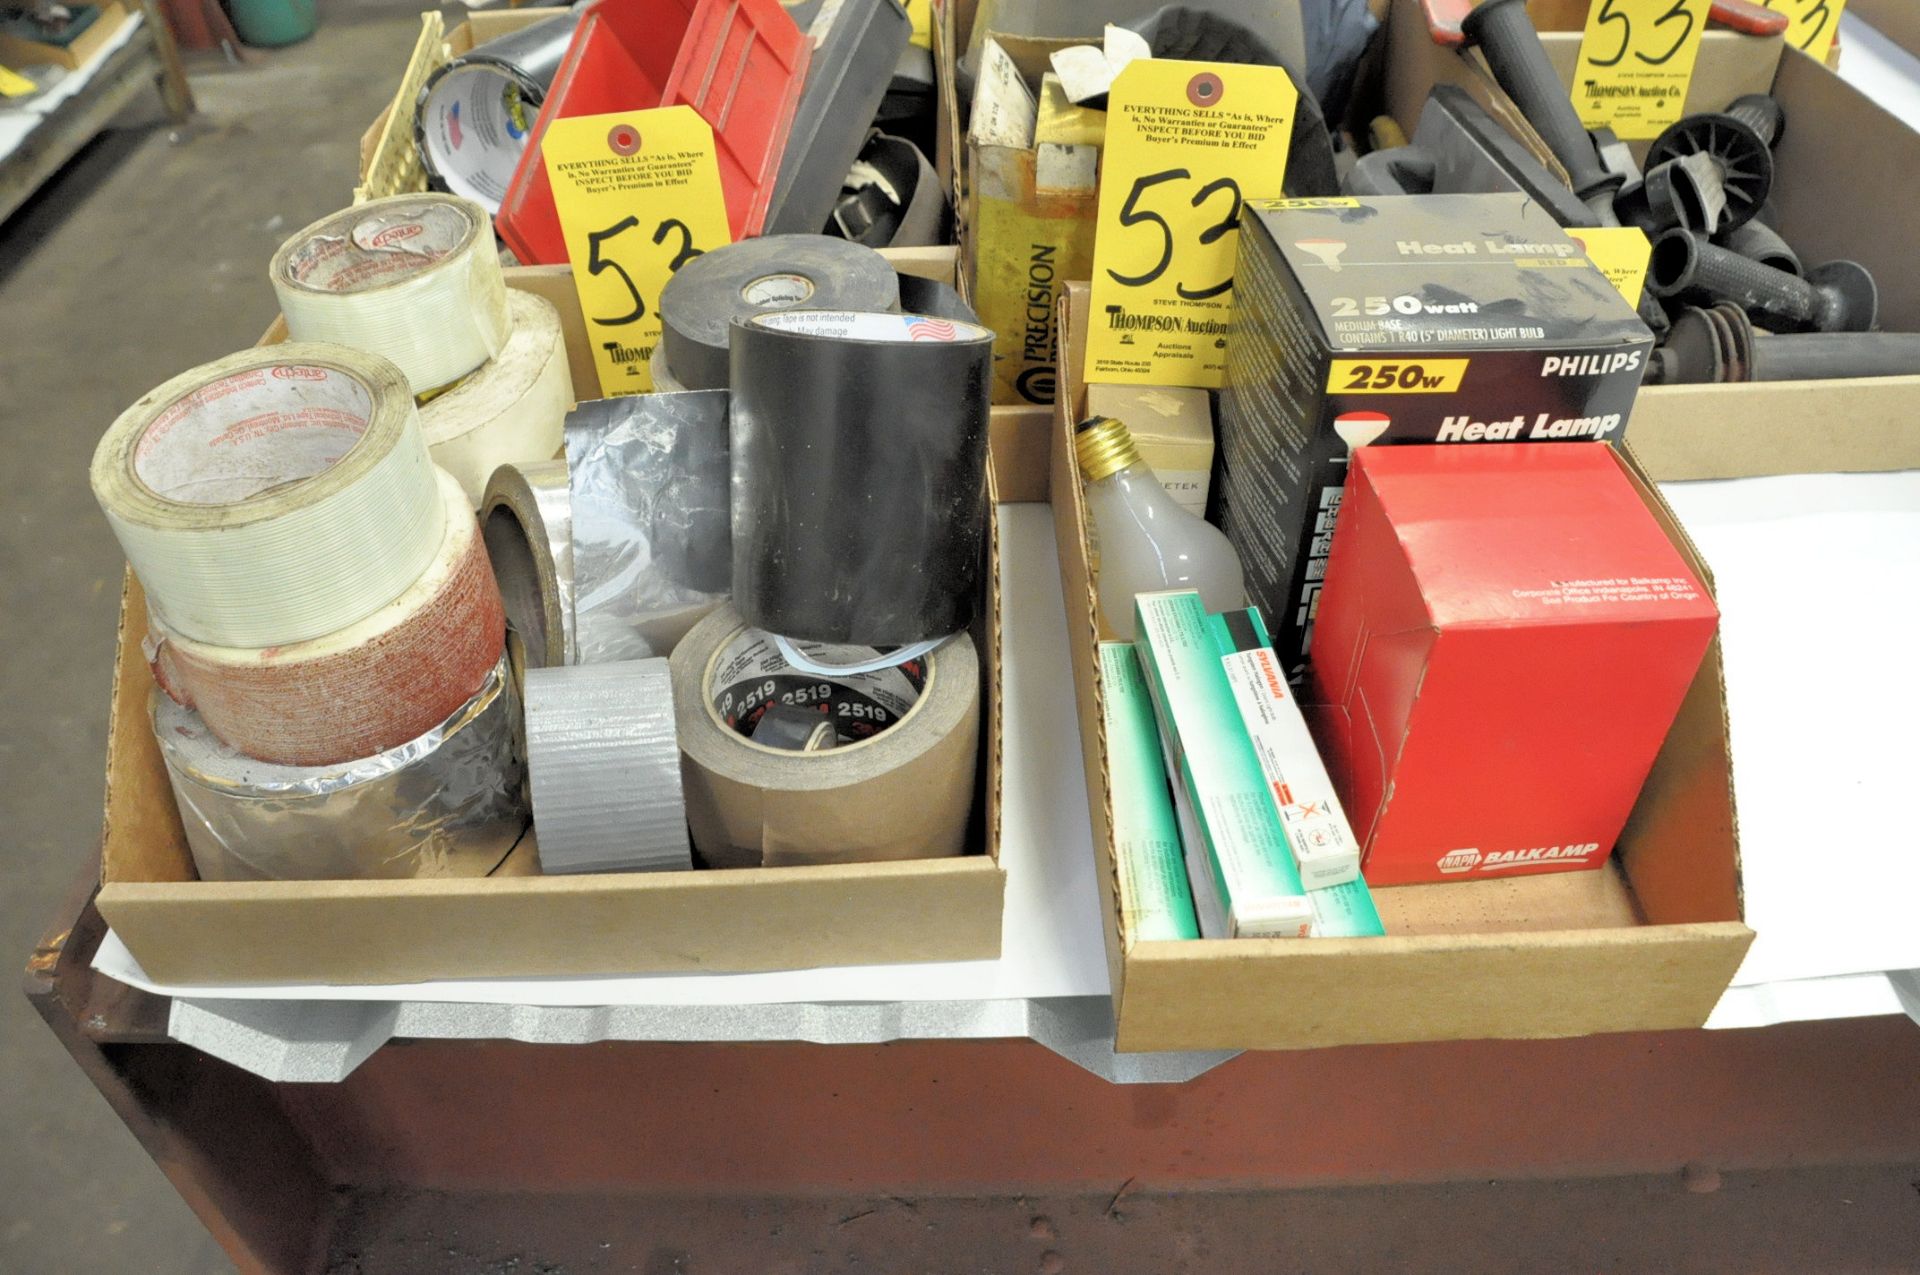 Lot-Tapes, Grinder Handles, Light Bulbs, Saw Blades, Hardware, Chain, etc. in (8) Boxes - Image 5 of 5